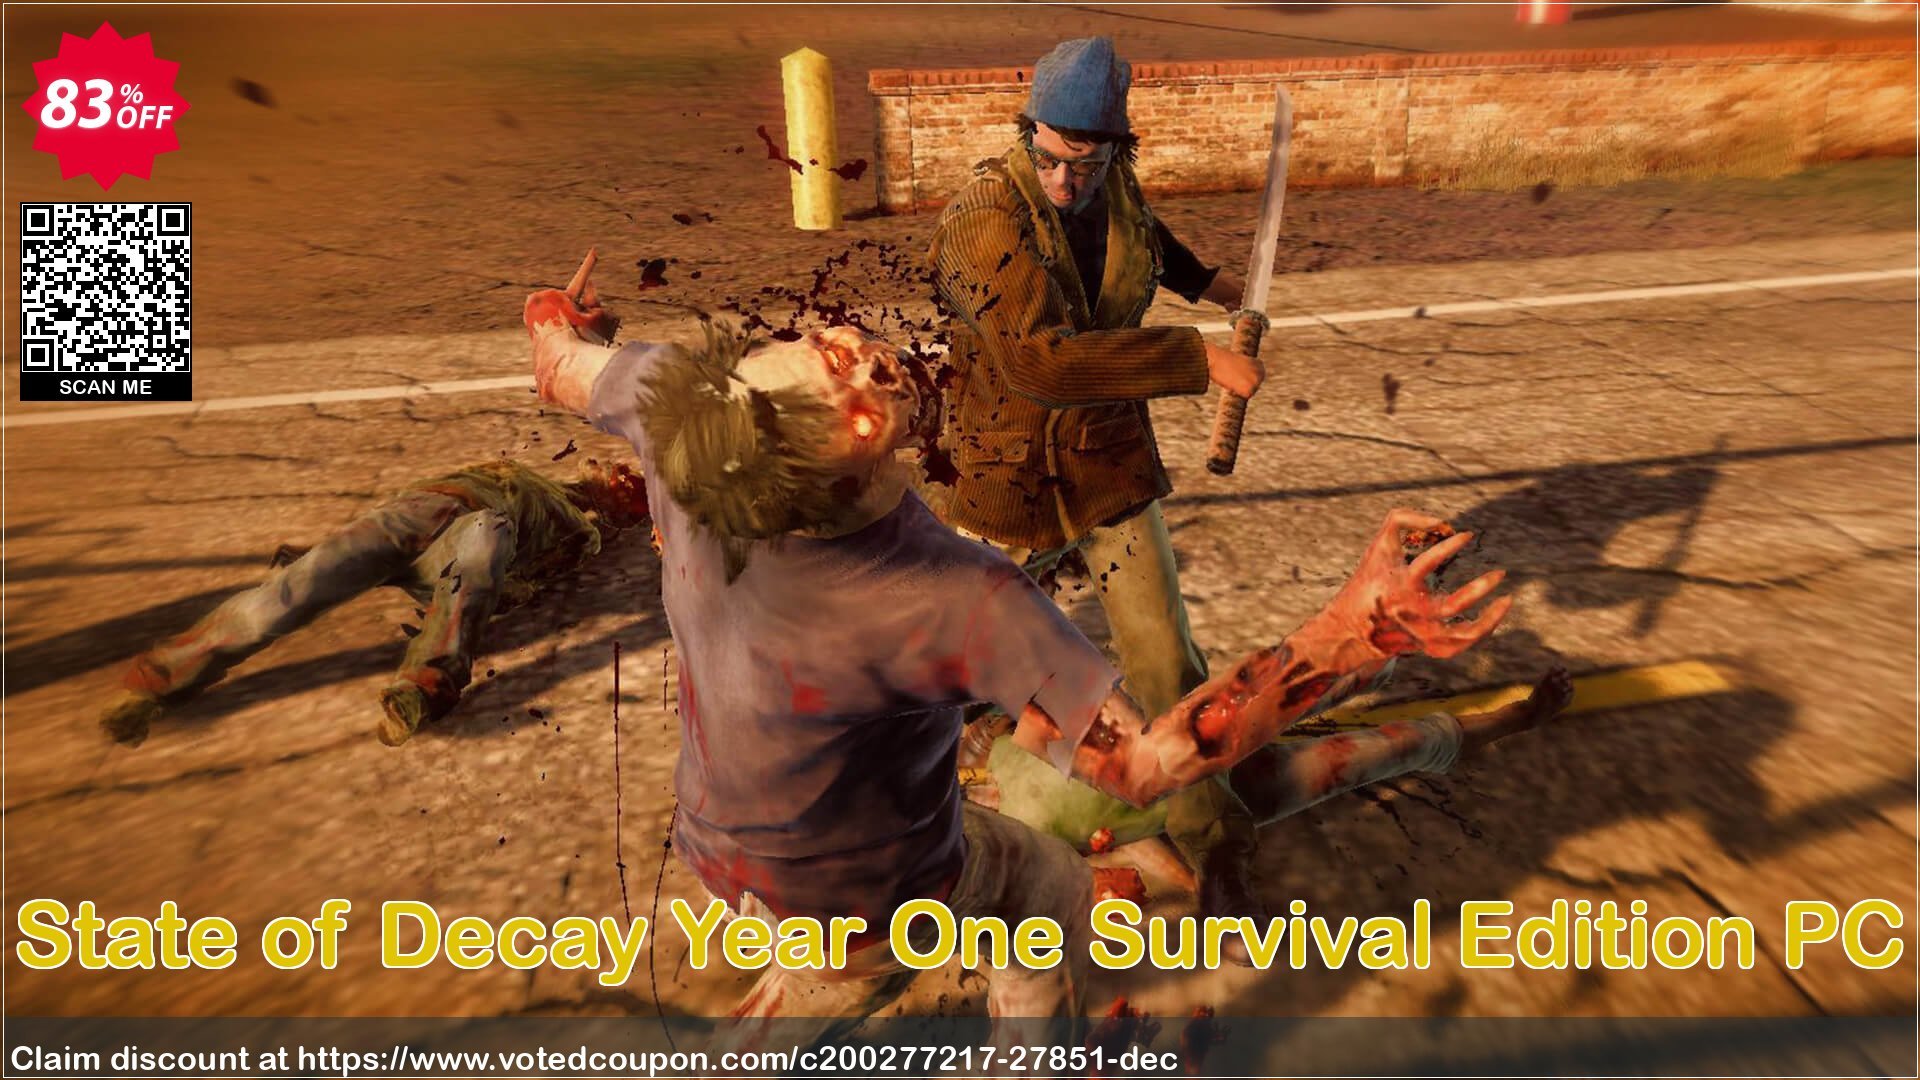 State of Decay Year One Survival Edition PC Coupon Code Apr 2024, 83% OFF - VotedCoupon